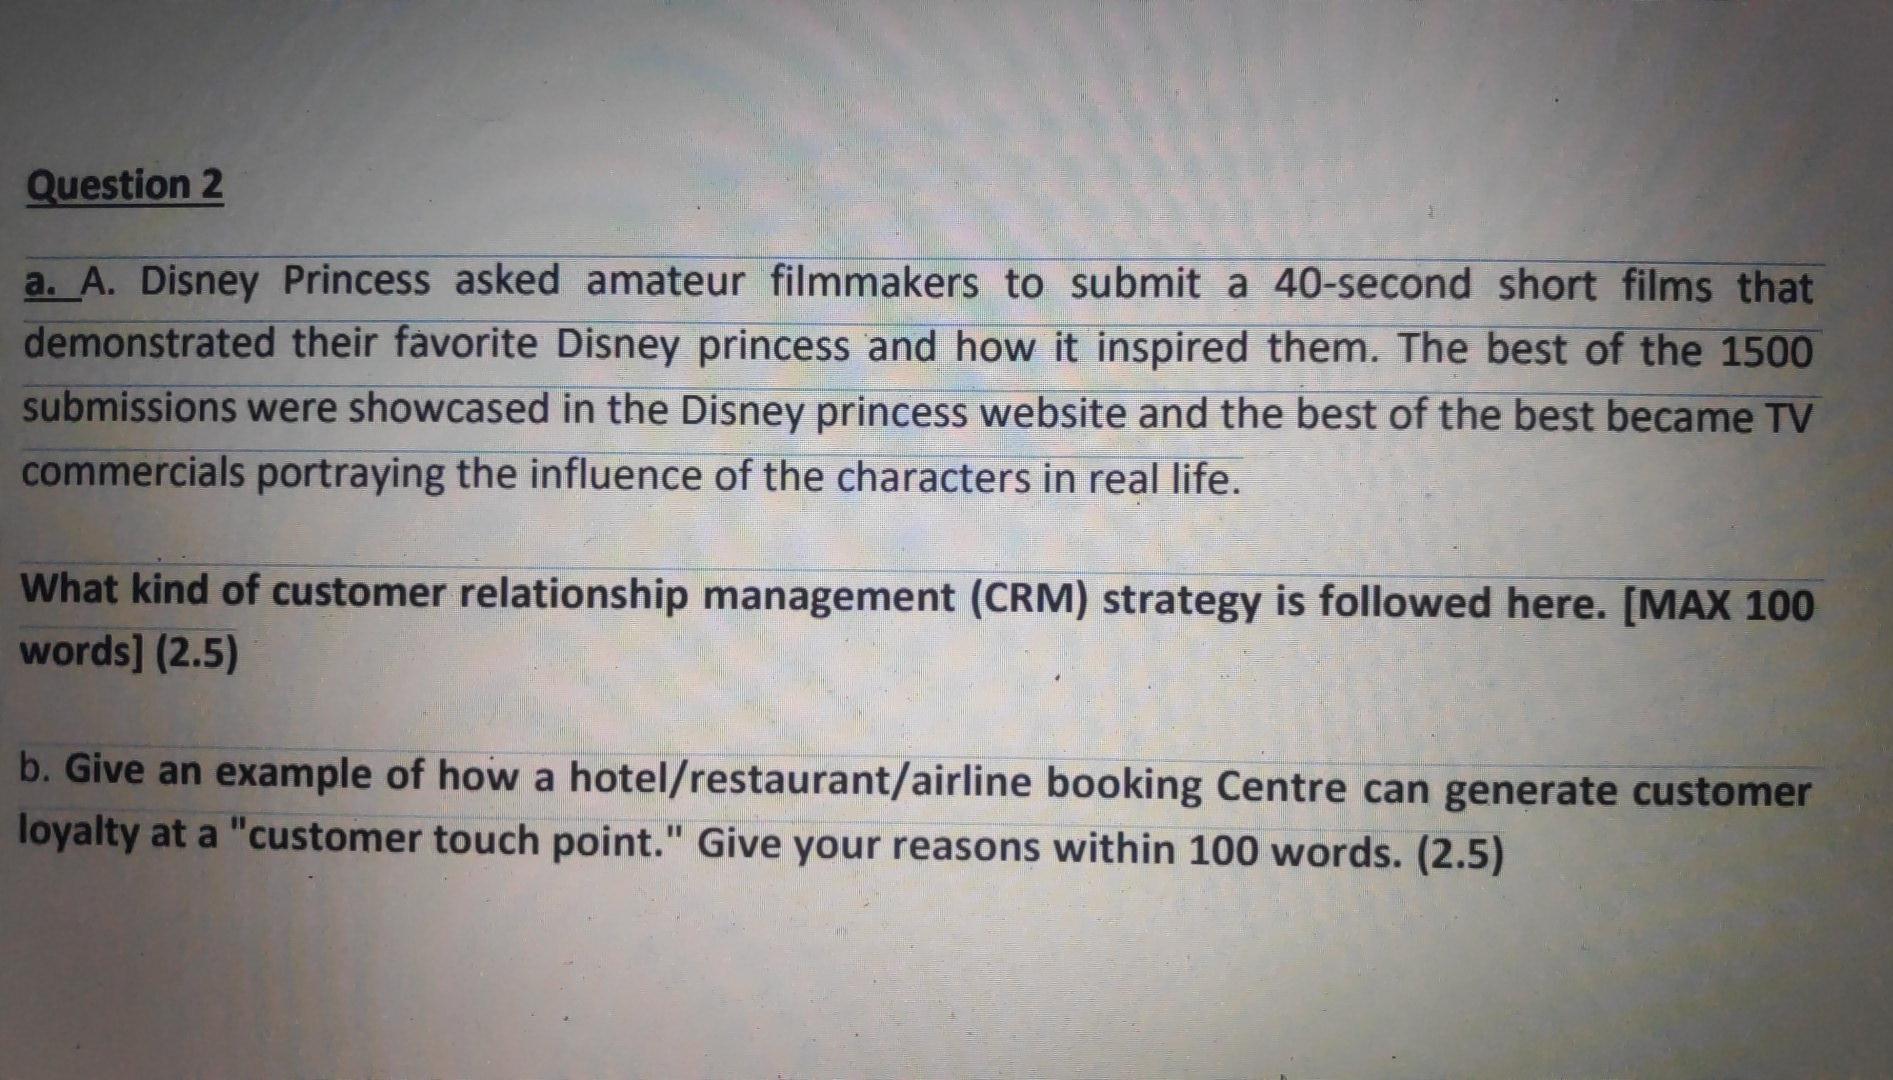 Disney Princess asked amateur filmmakers to submit a 40-second short films that demonstrated their...